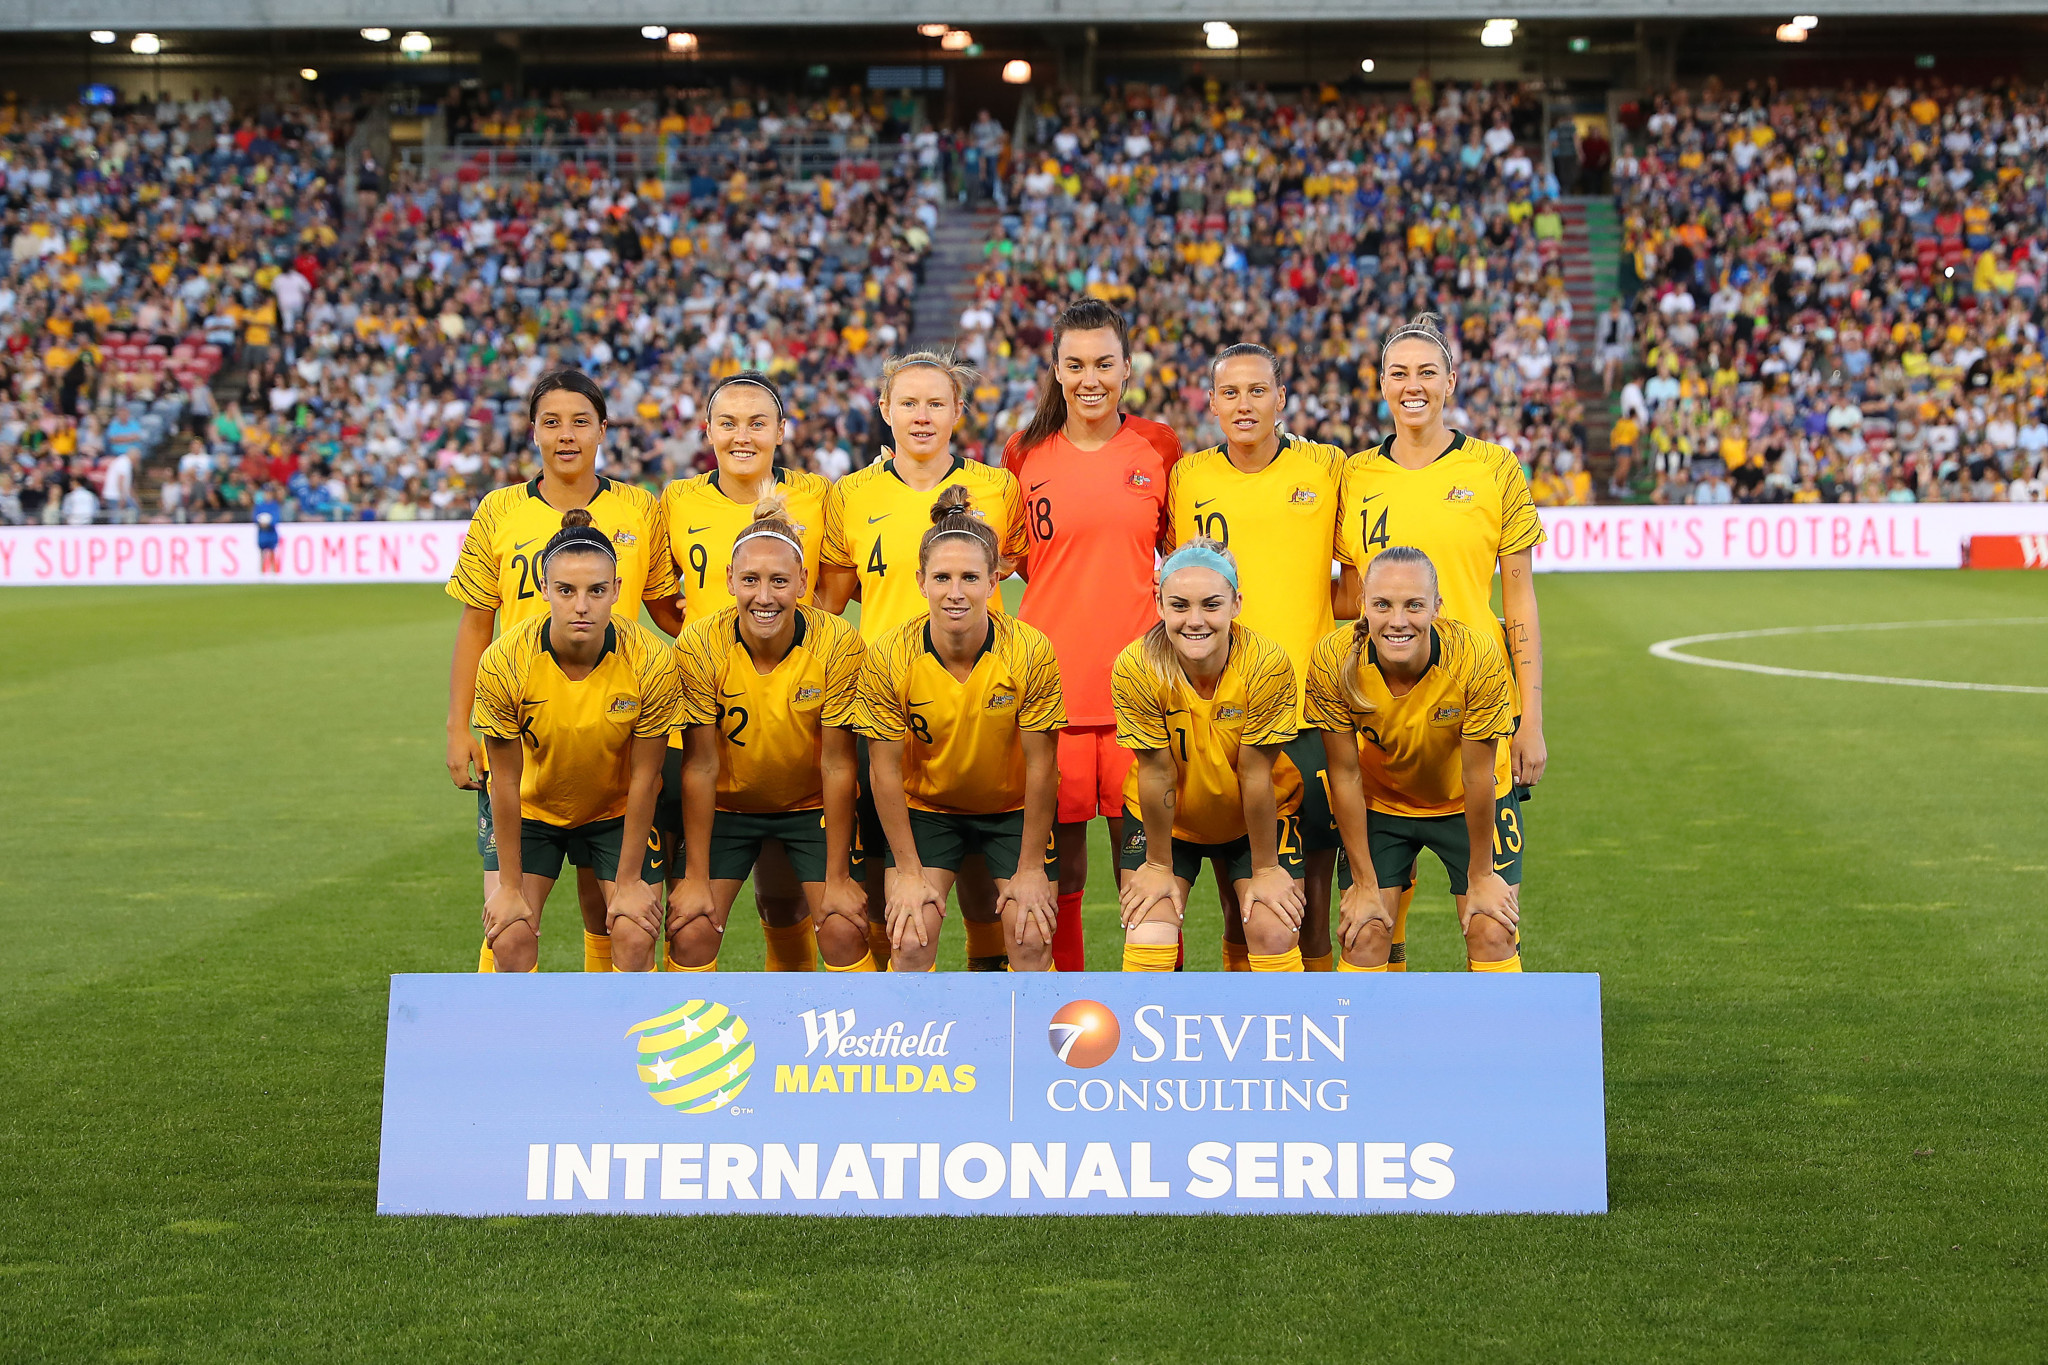 Australia are considered among the favourites to win this year's FIFA Women's World Cup in France ©Getty Images